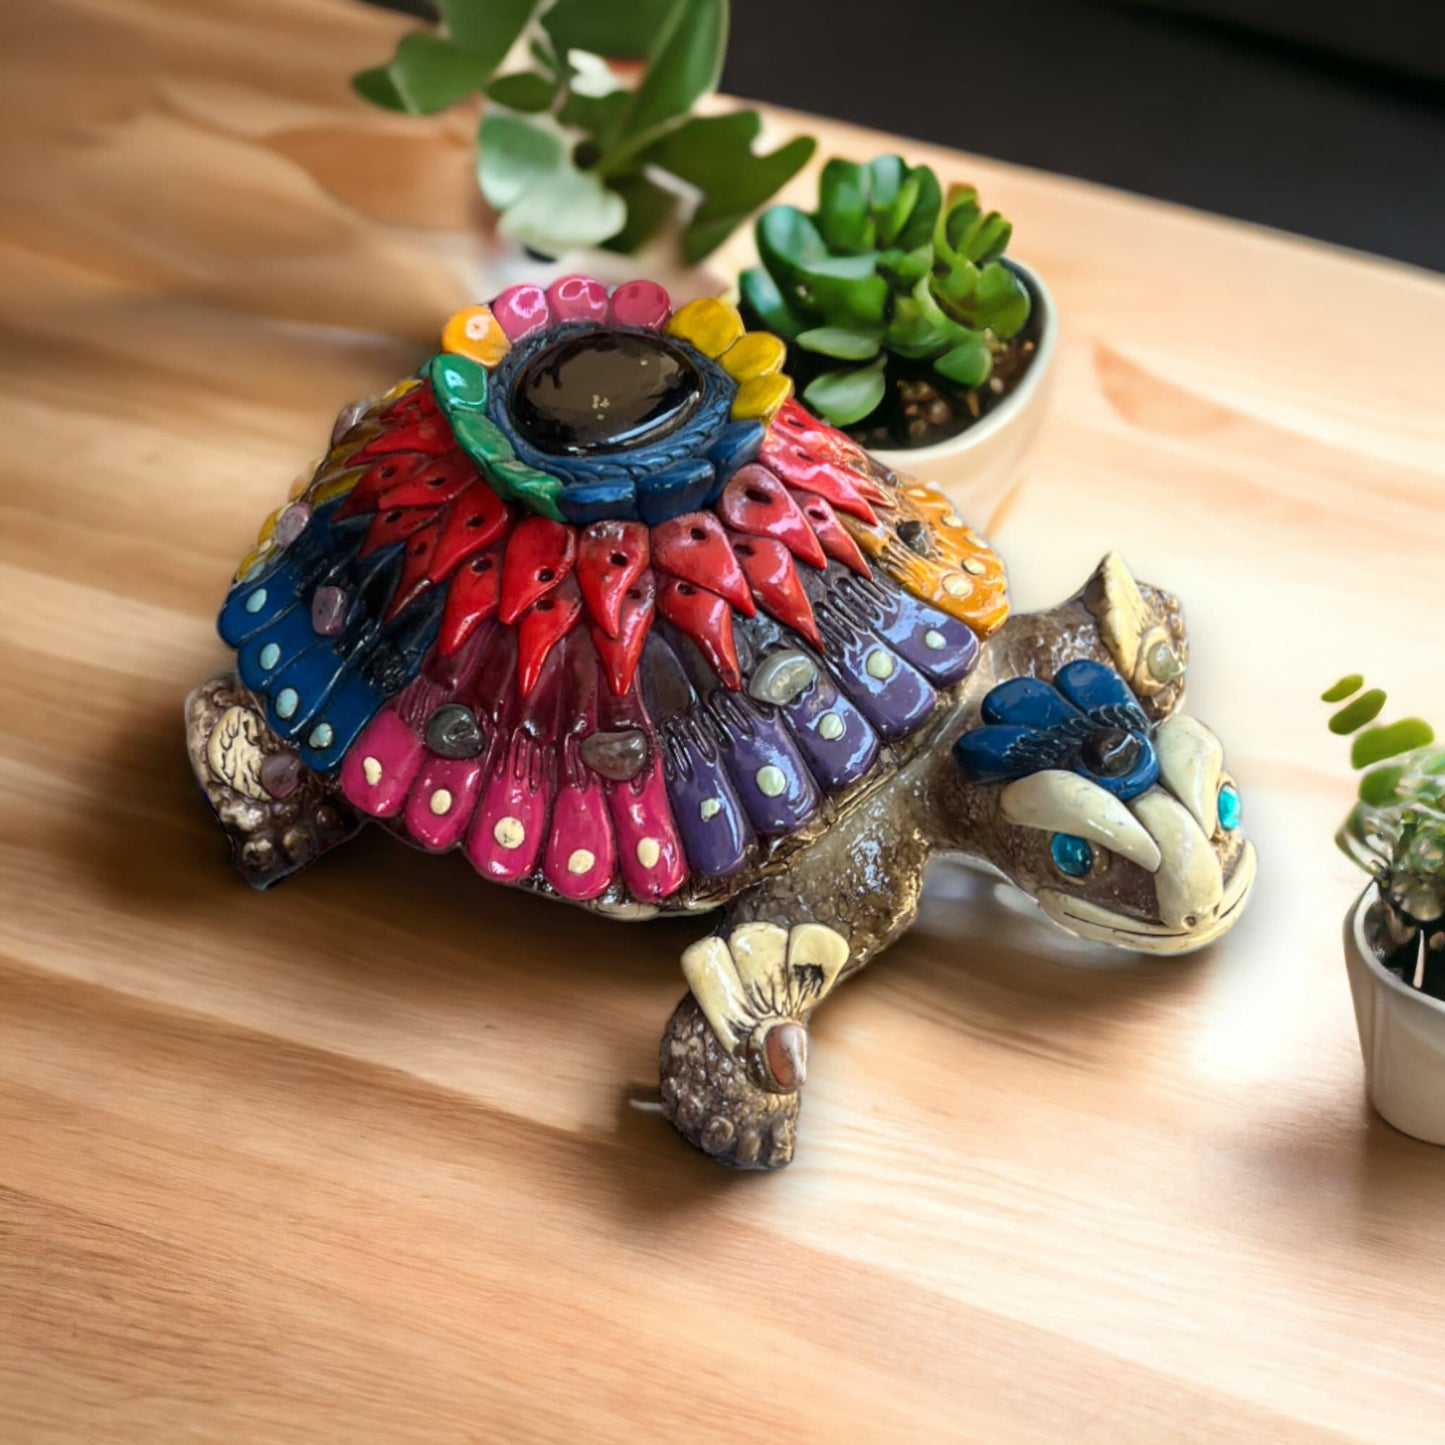 Artisan Crafted Aztec Turtle Statue | Handmade Cultural Decor Accent (Small)